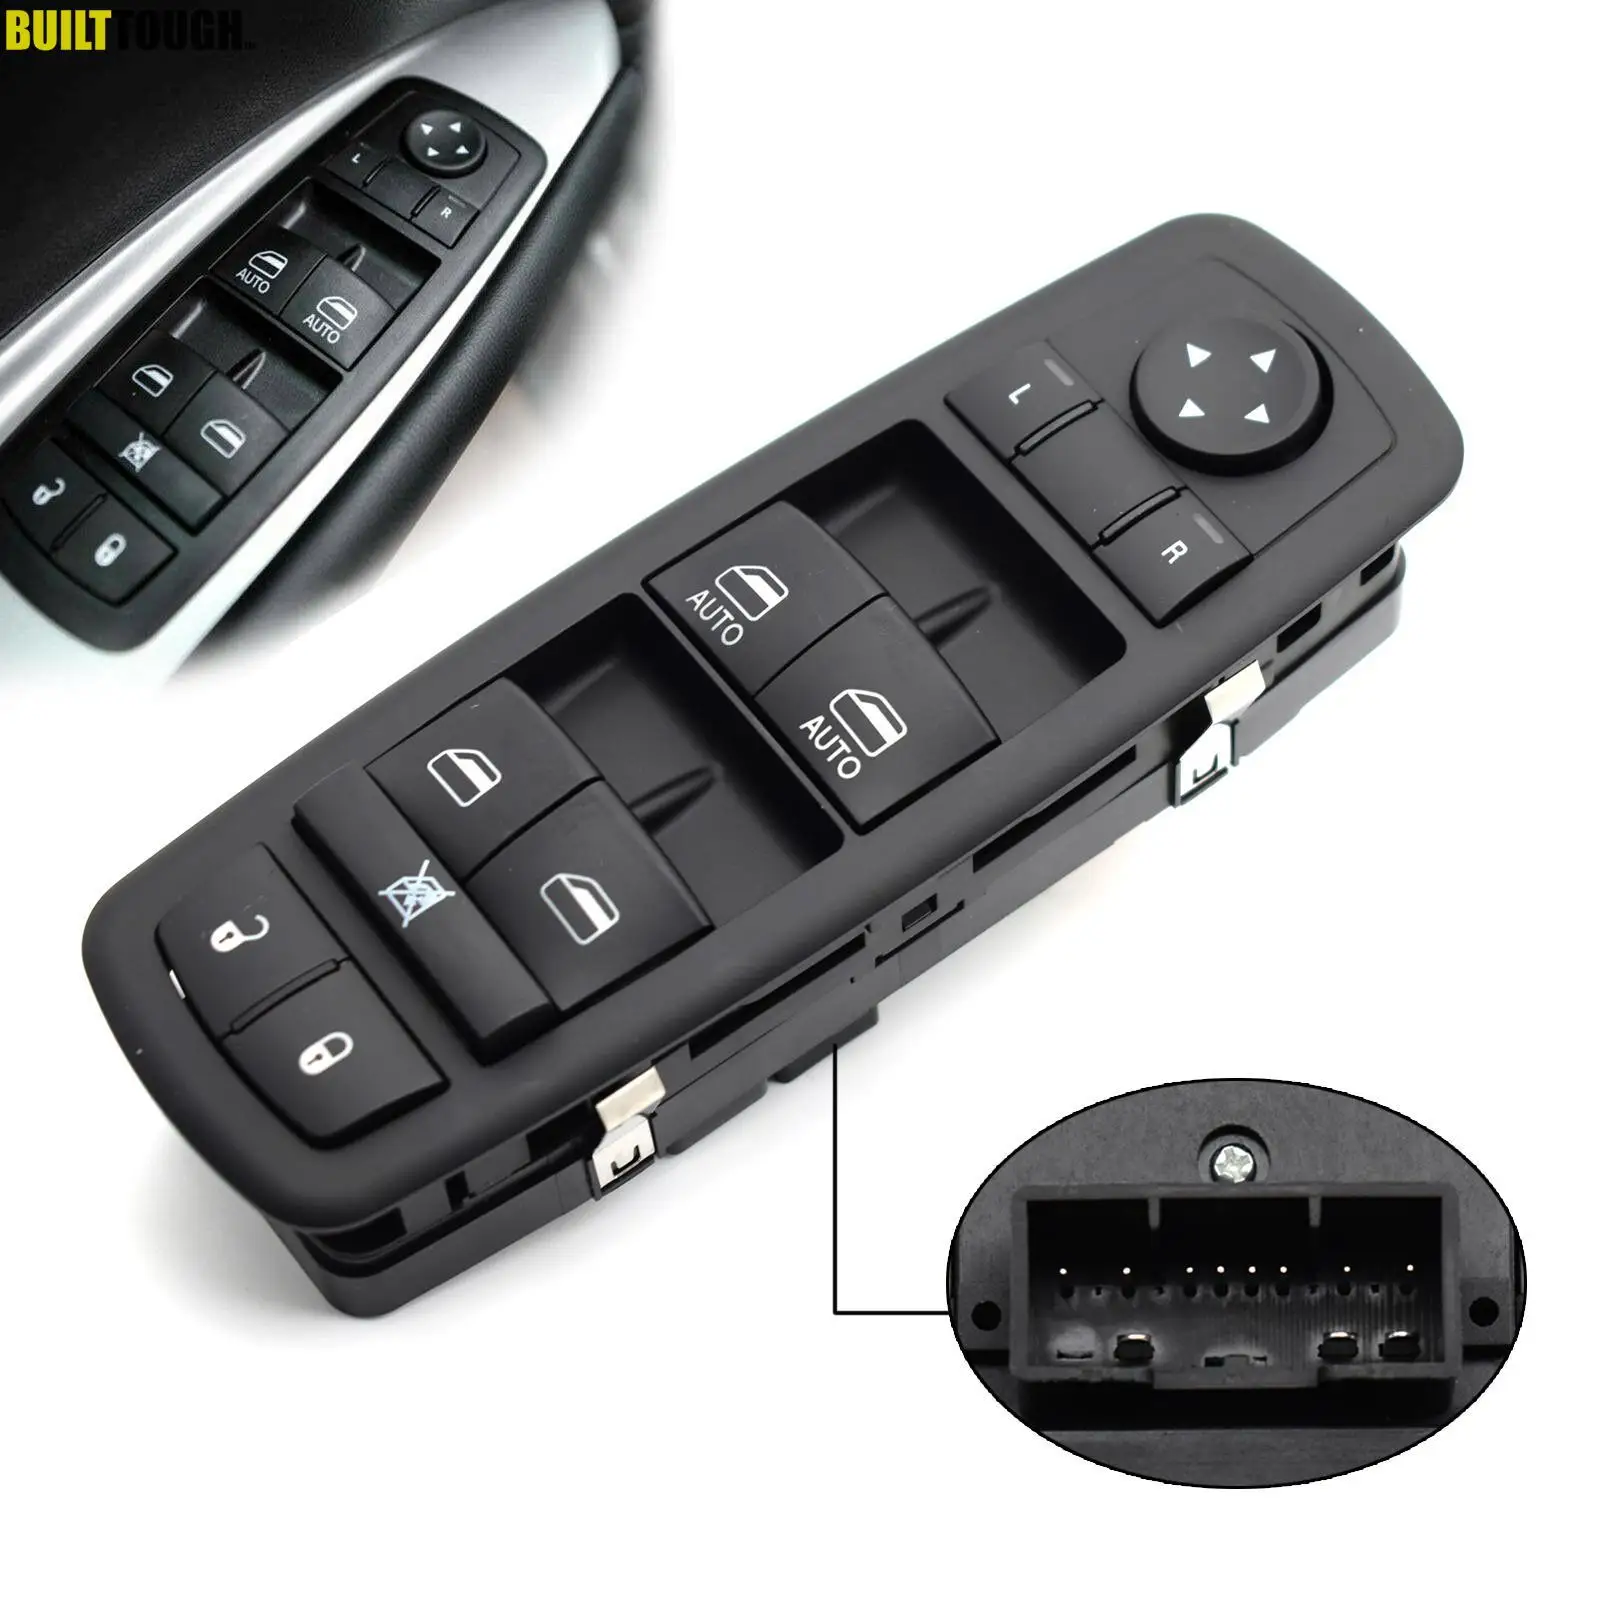 

68030823AC 68030823AD 68030823AE Power Master Window Switch For Dodge Durango Jeep Grand Cherokee 2011 2012 2013 Car Accessories